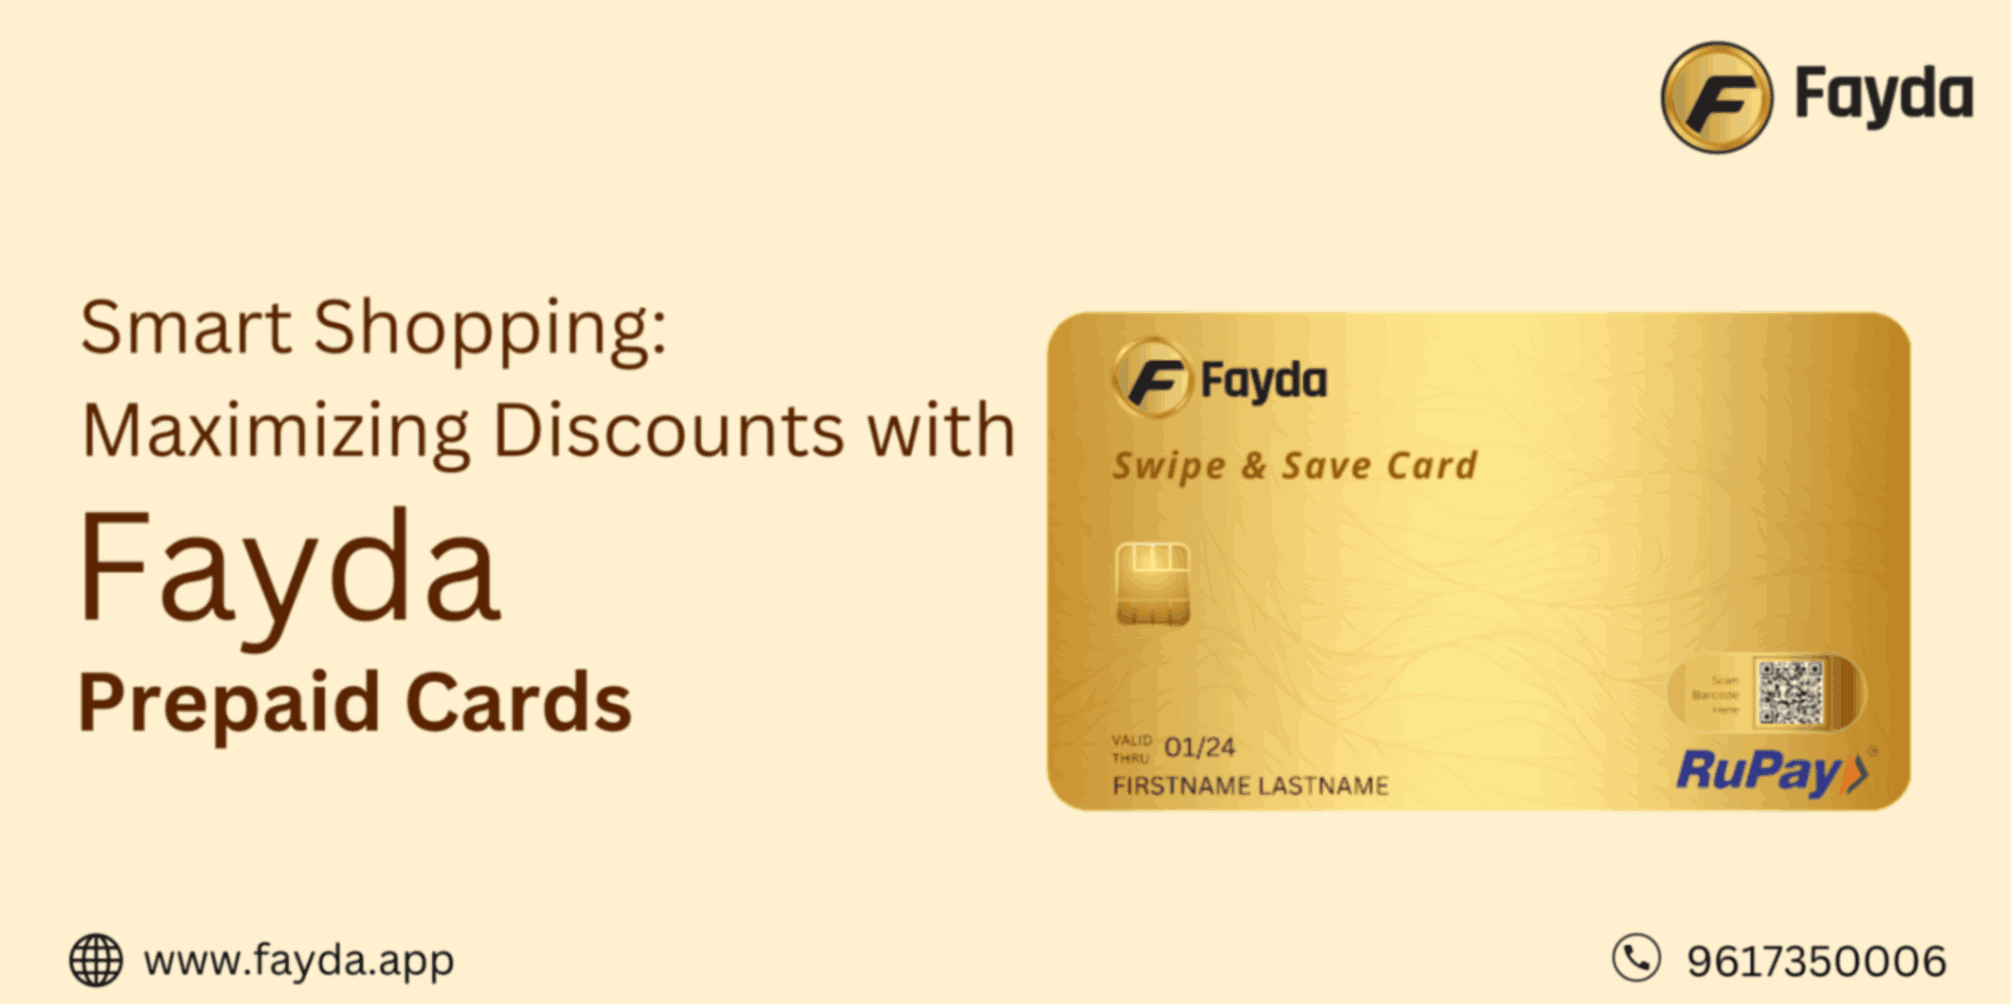 Smart Shopping: Maximizing Discounts with Fayda Prepaid Cards